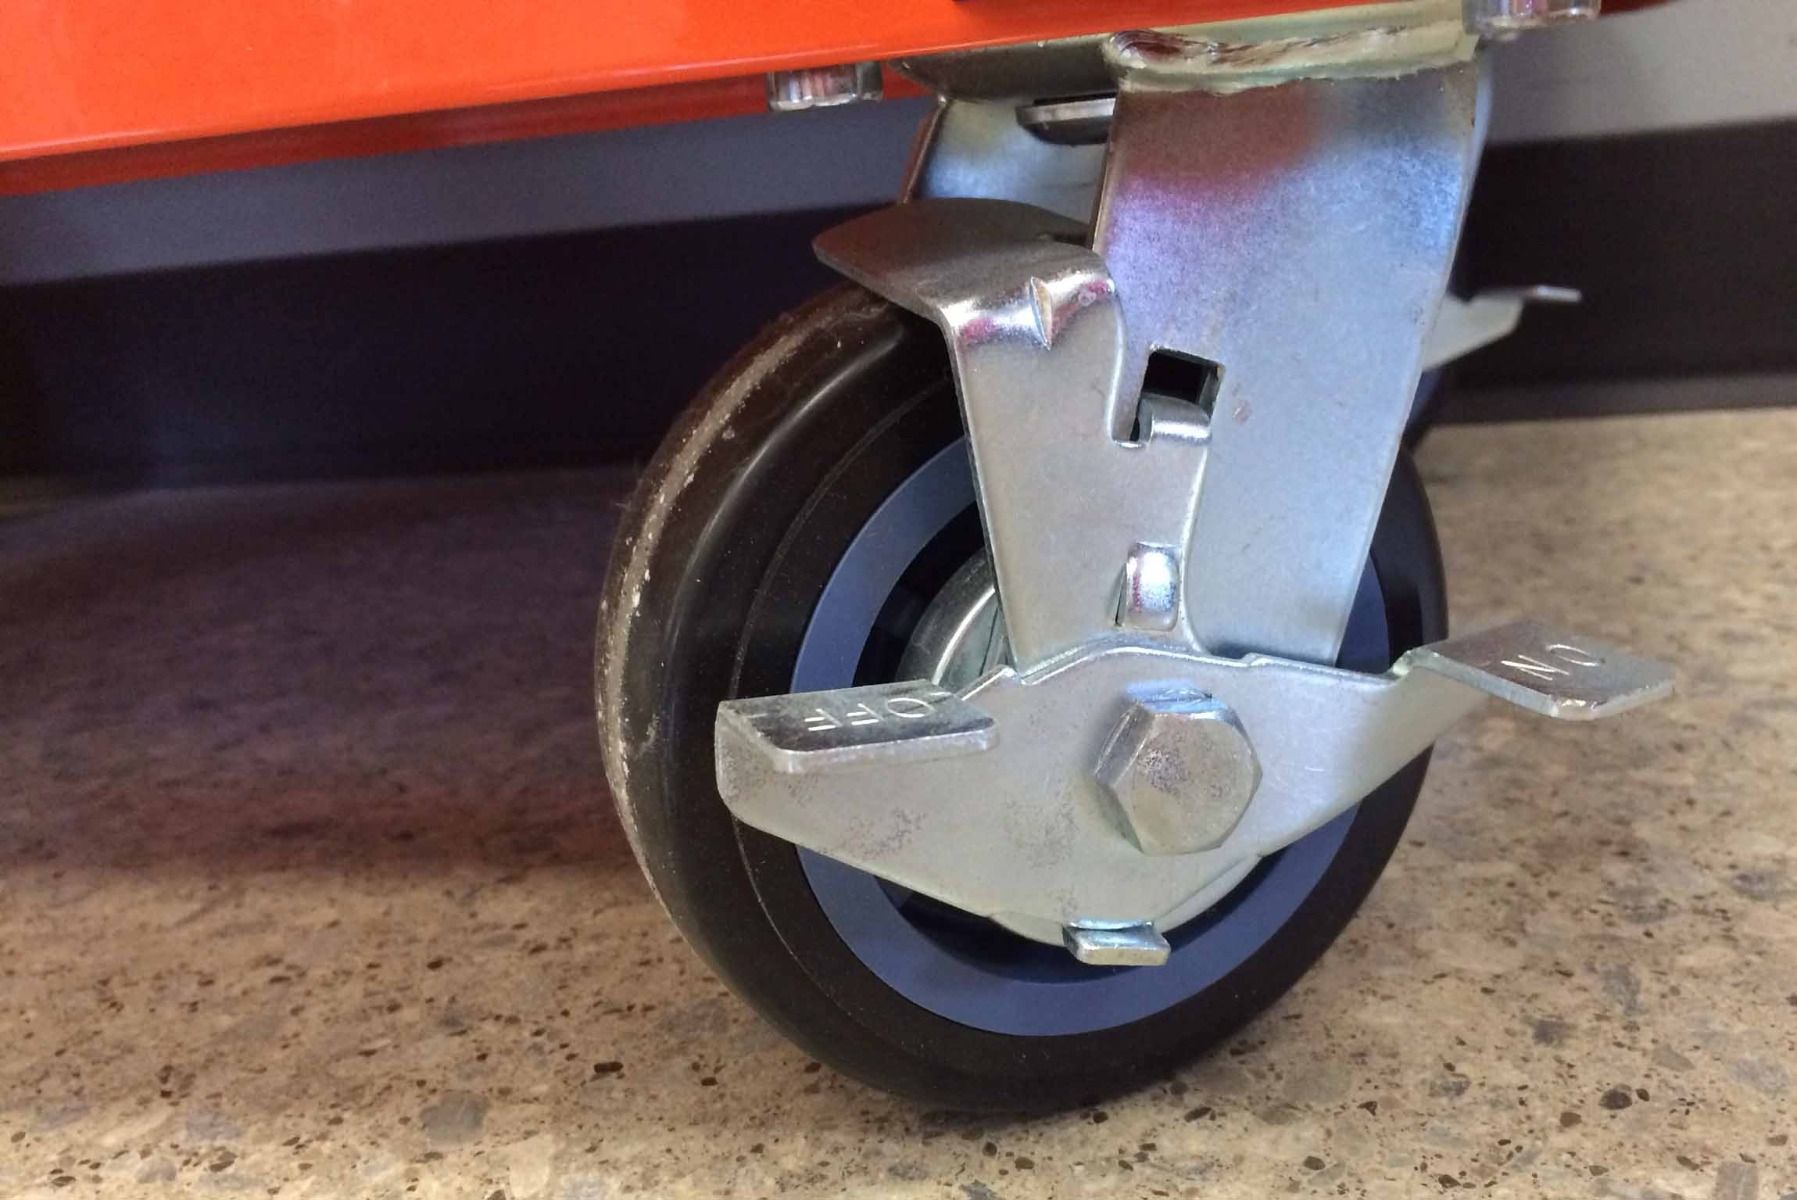 2 locking castors with brakes. Convenient and safe!